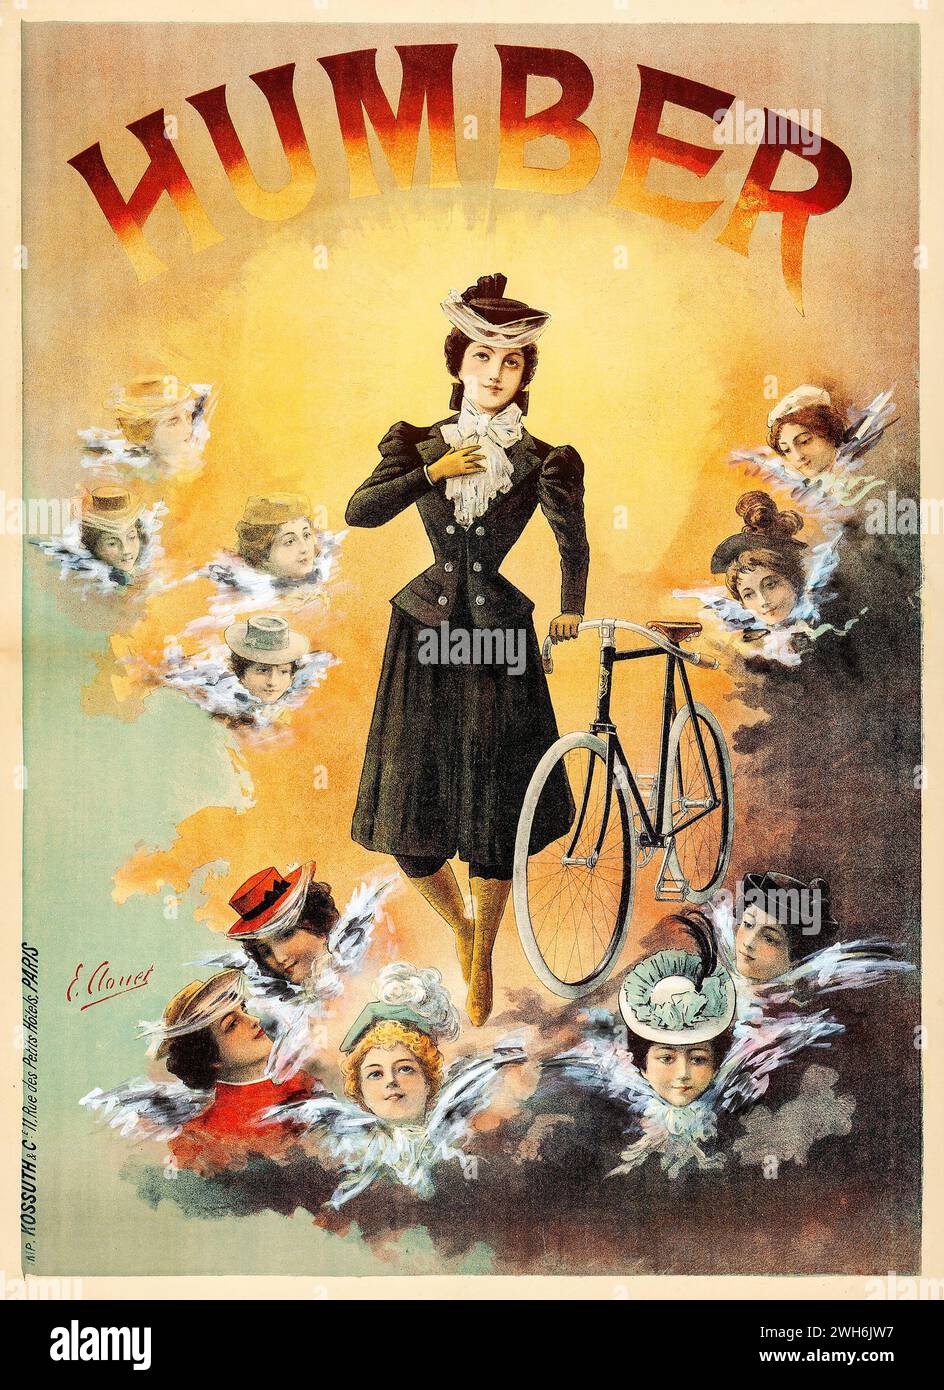 Humber Advertising Poster (Humber, c. Late 1890s) French Bicycle advertisement - E. Clouet Artwork Stock Photo